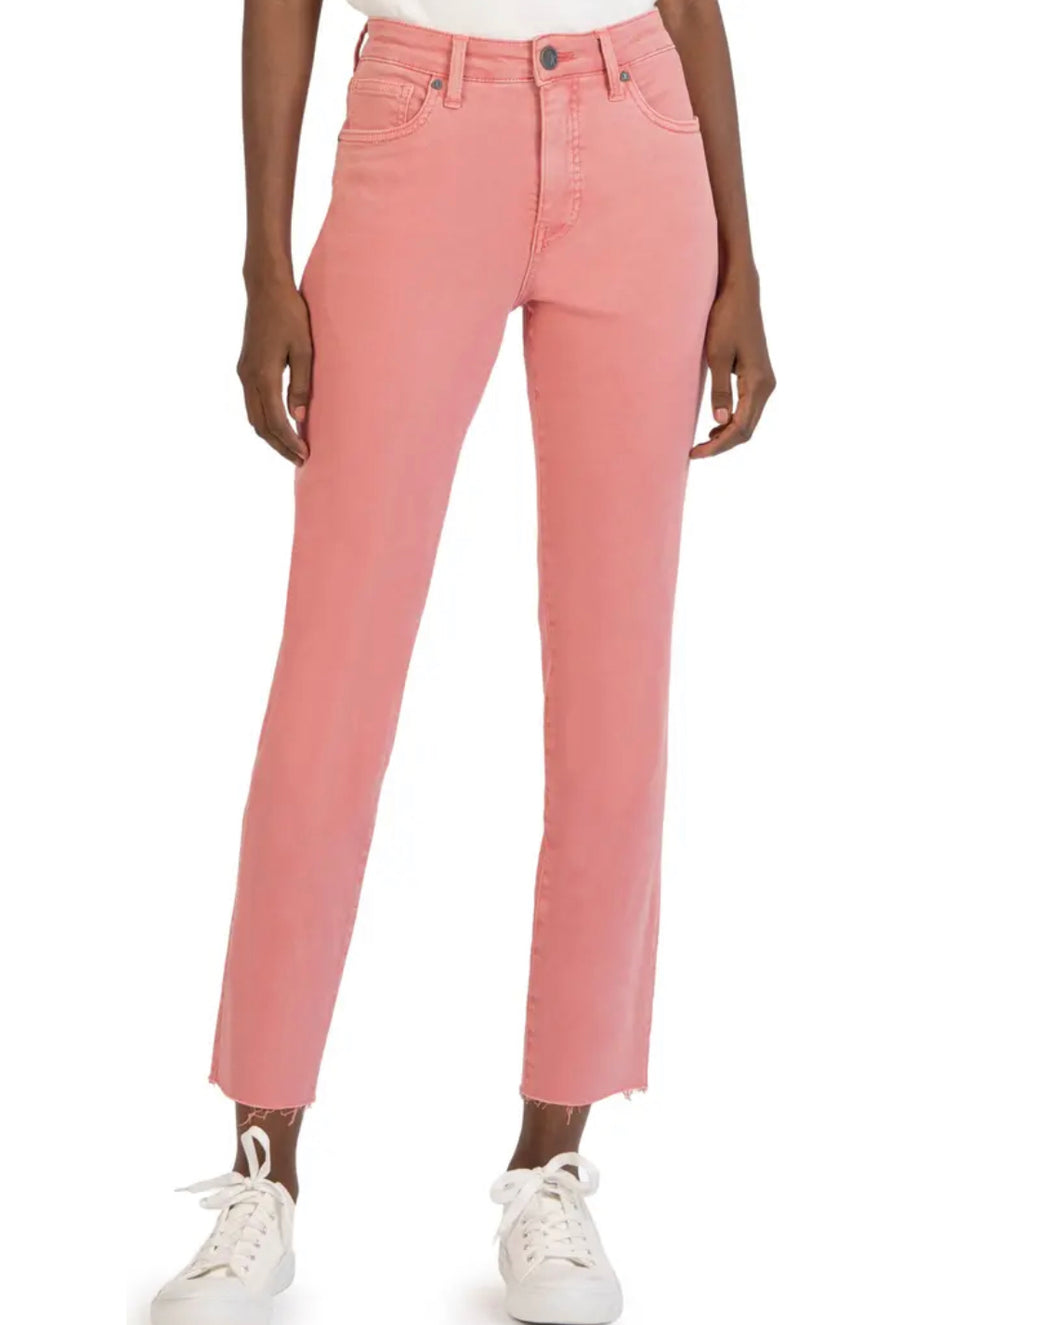 Kut: Reese High Rise Straight Leg in Soft Coral